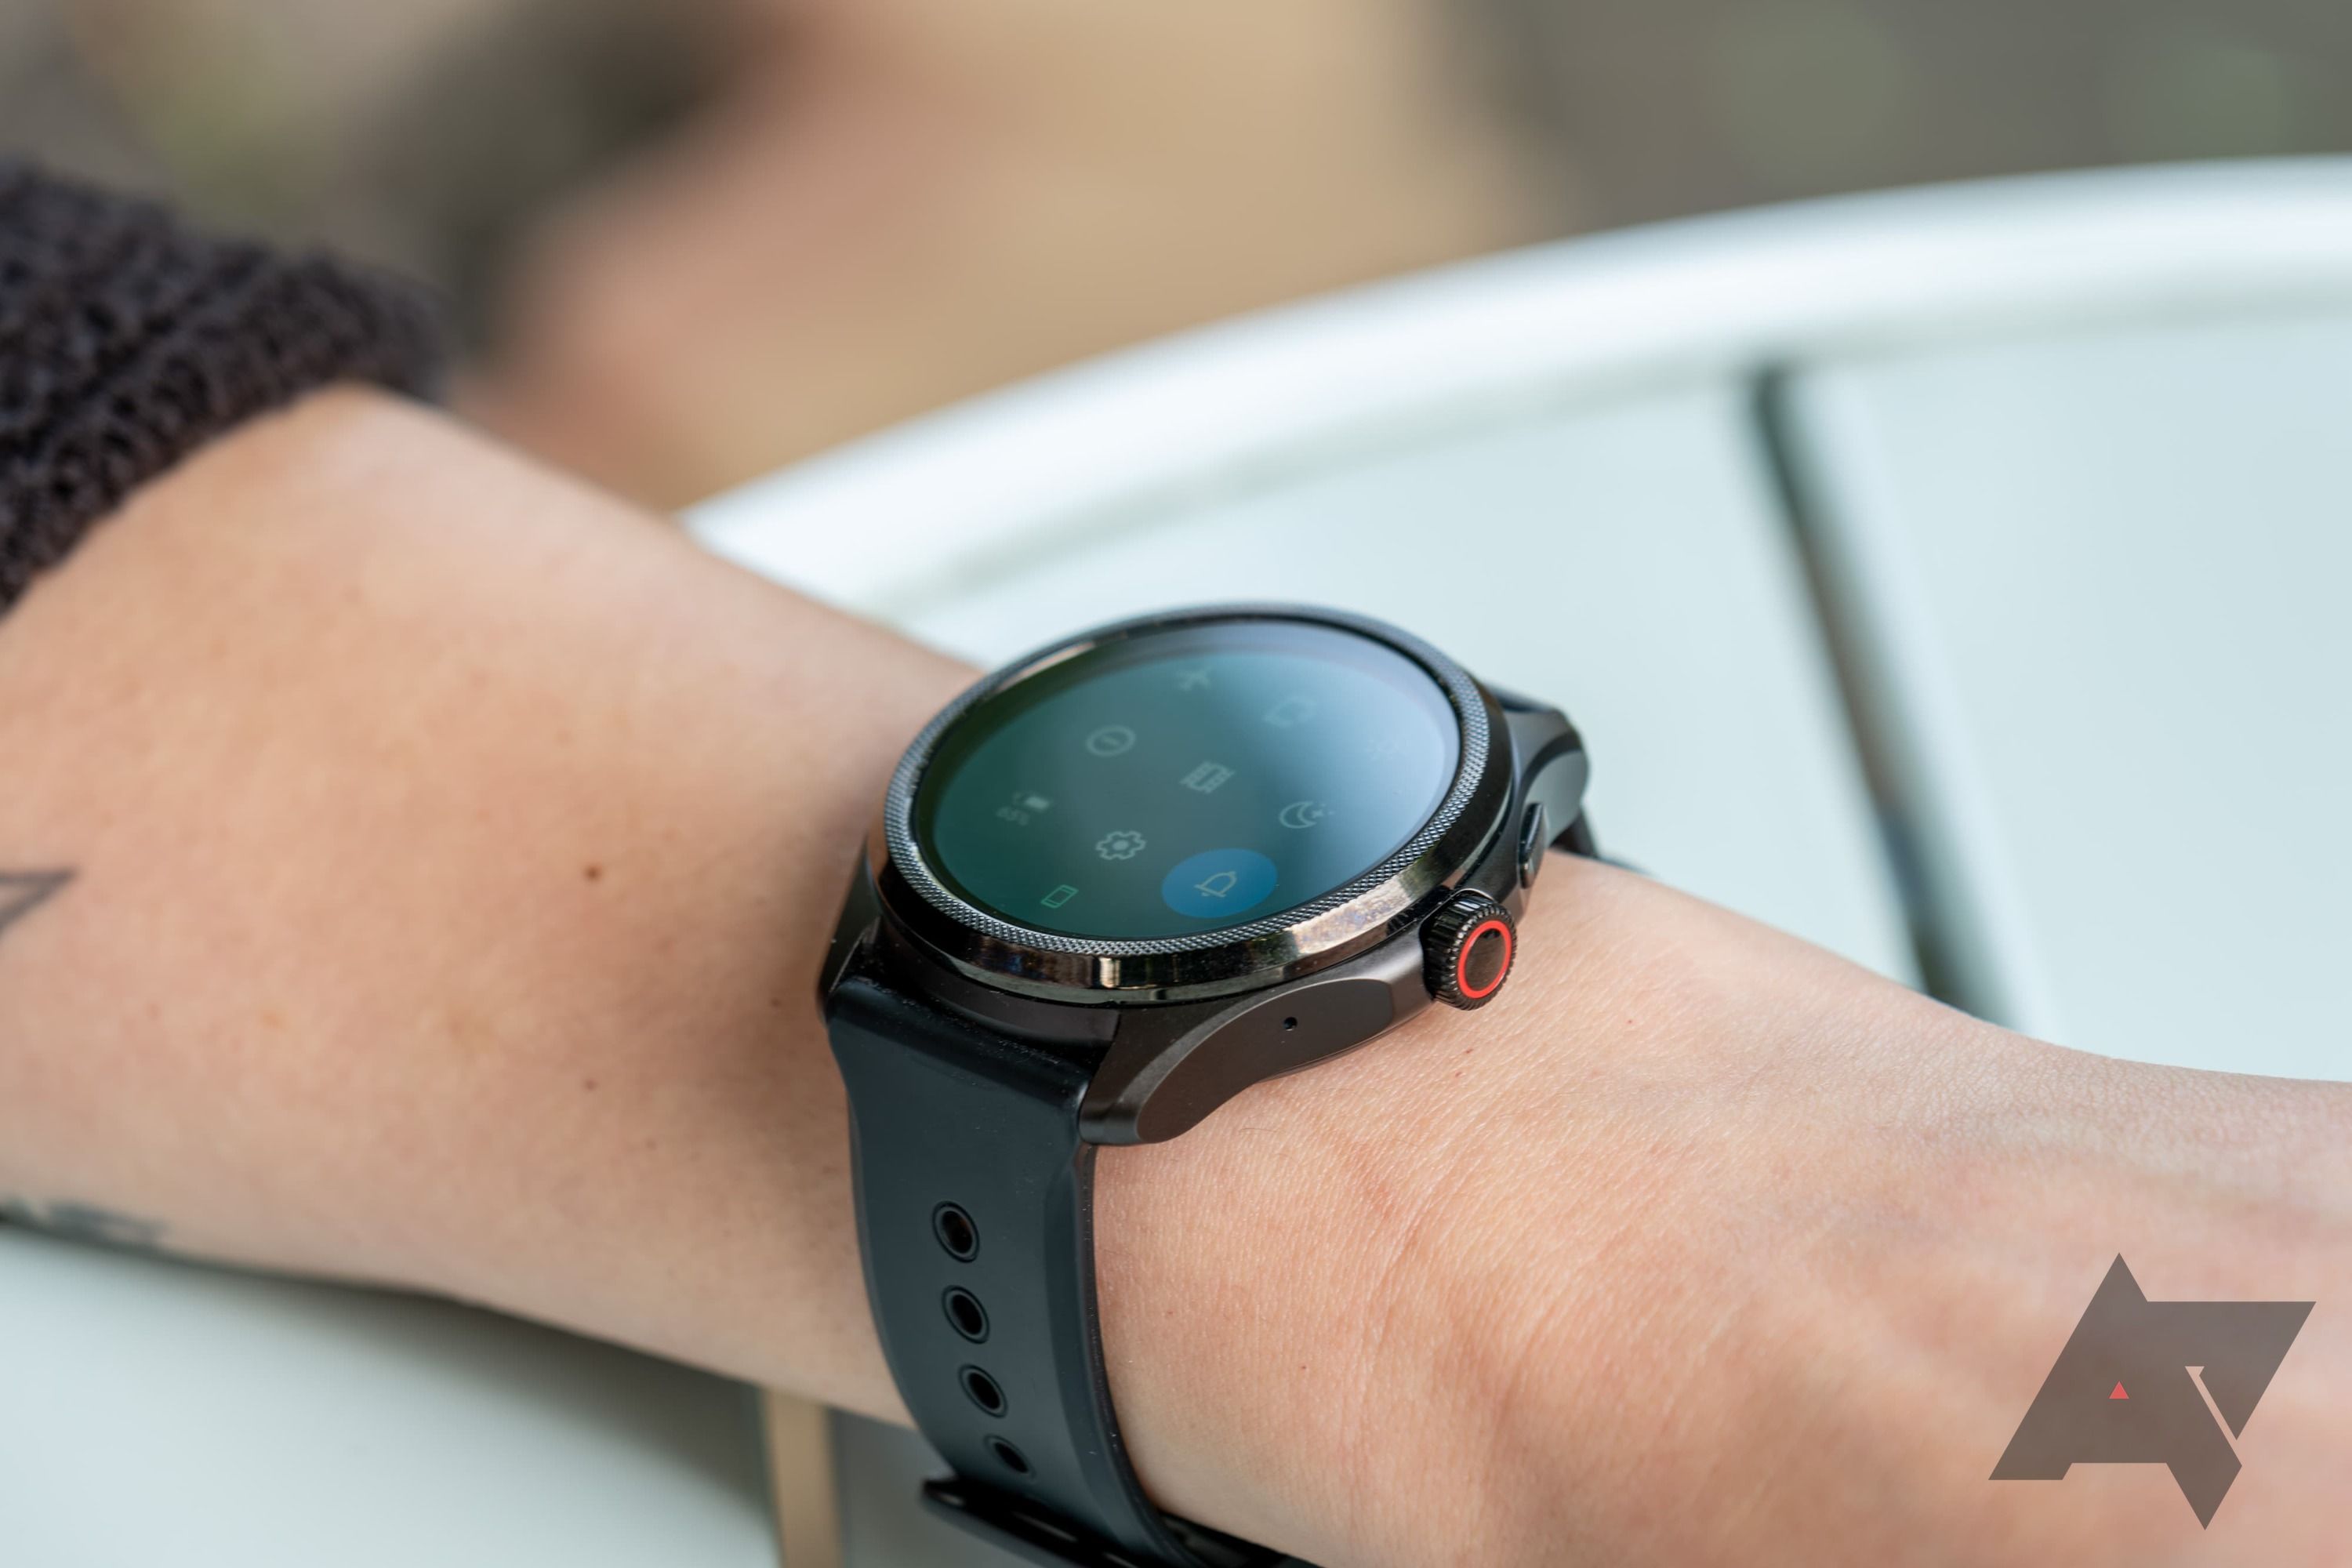 A Mobvoi Ticwatch Pro around an arm that's resting on a table outside